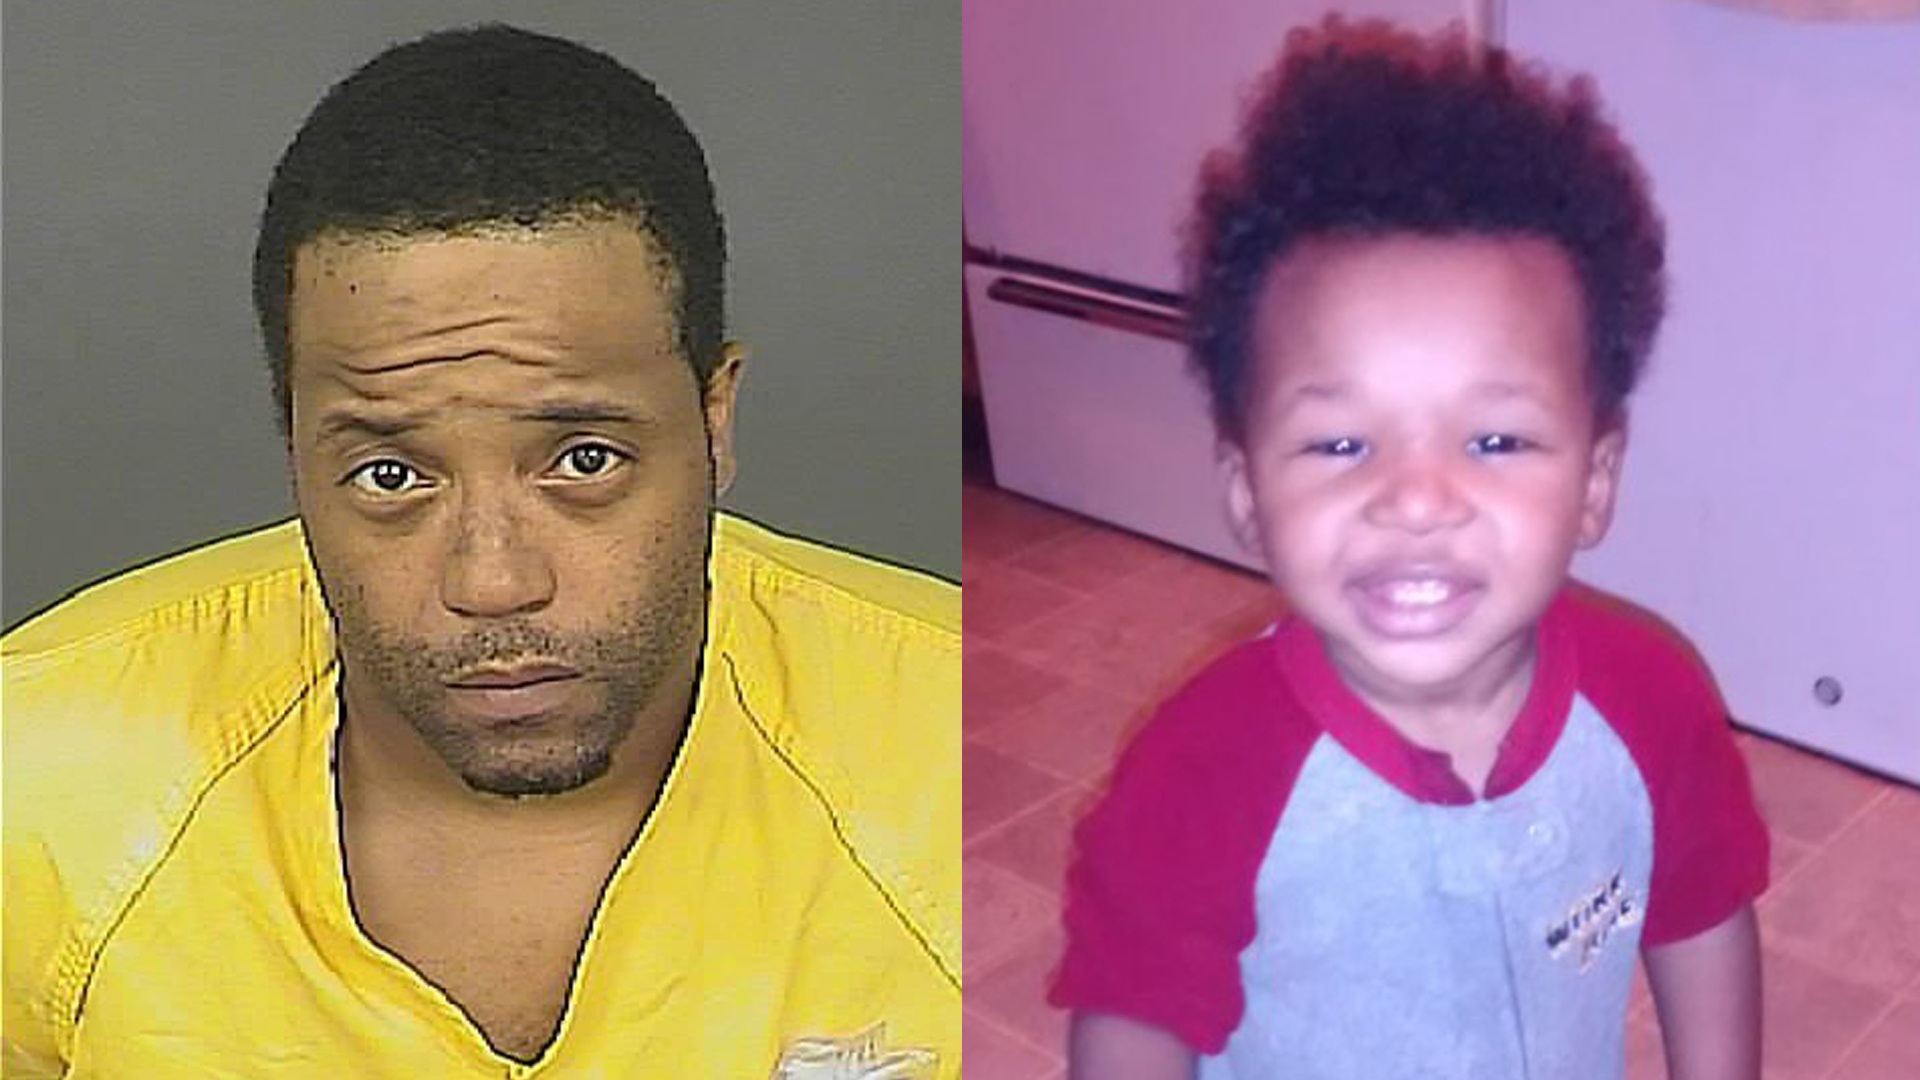 DeLonta Crank Gets 40 Years In Prison For Murder Of 23-Month-Old Javion Johnson